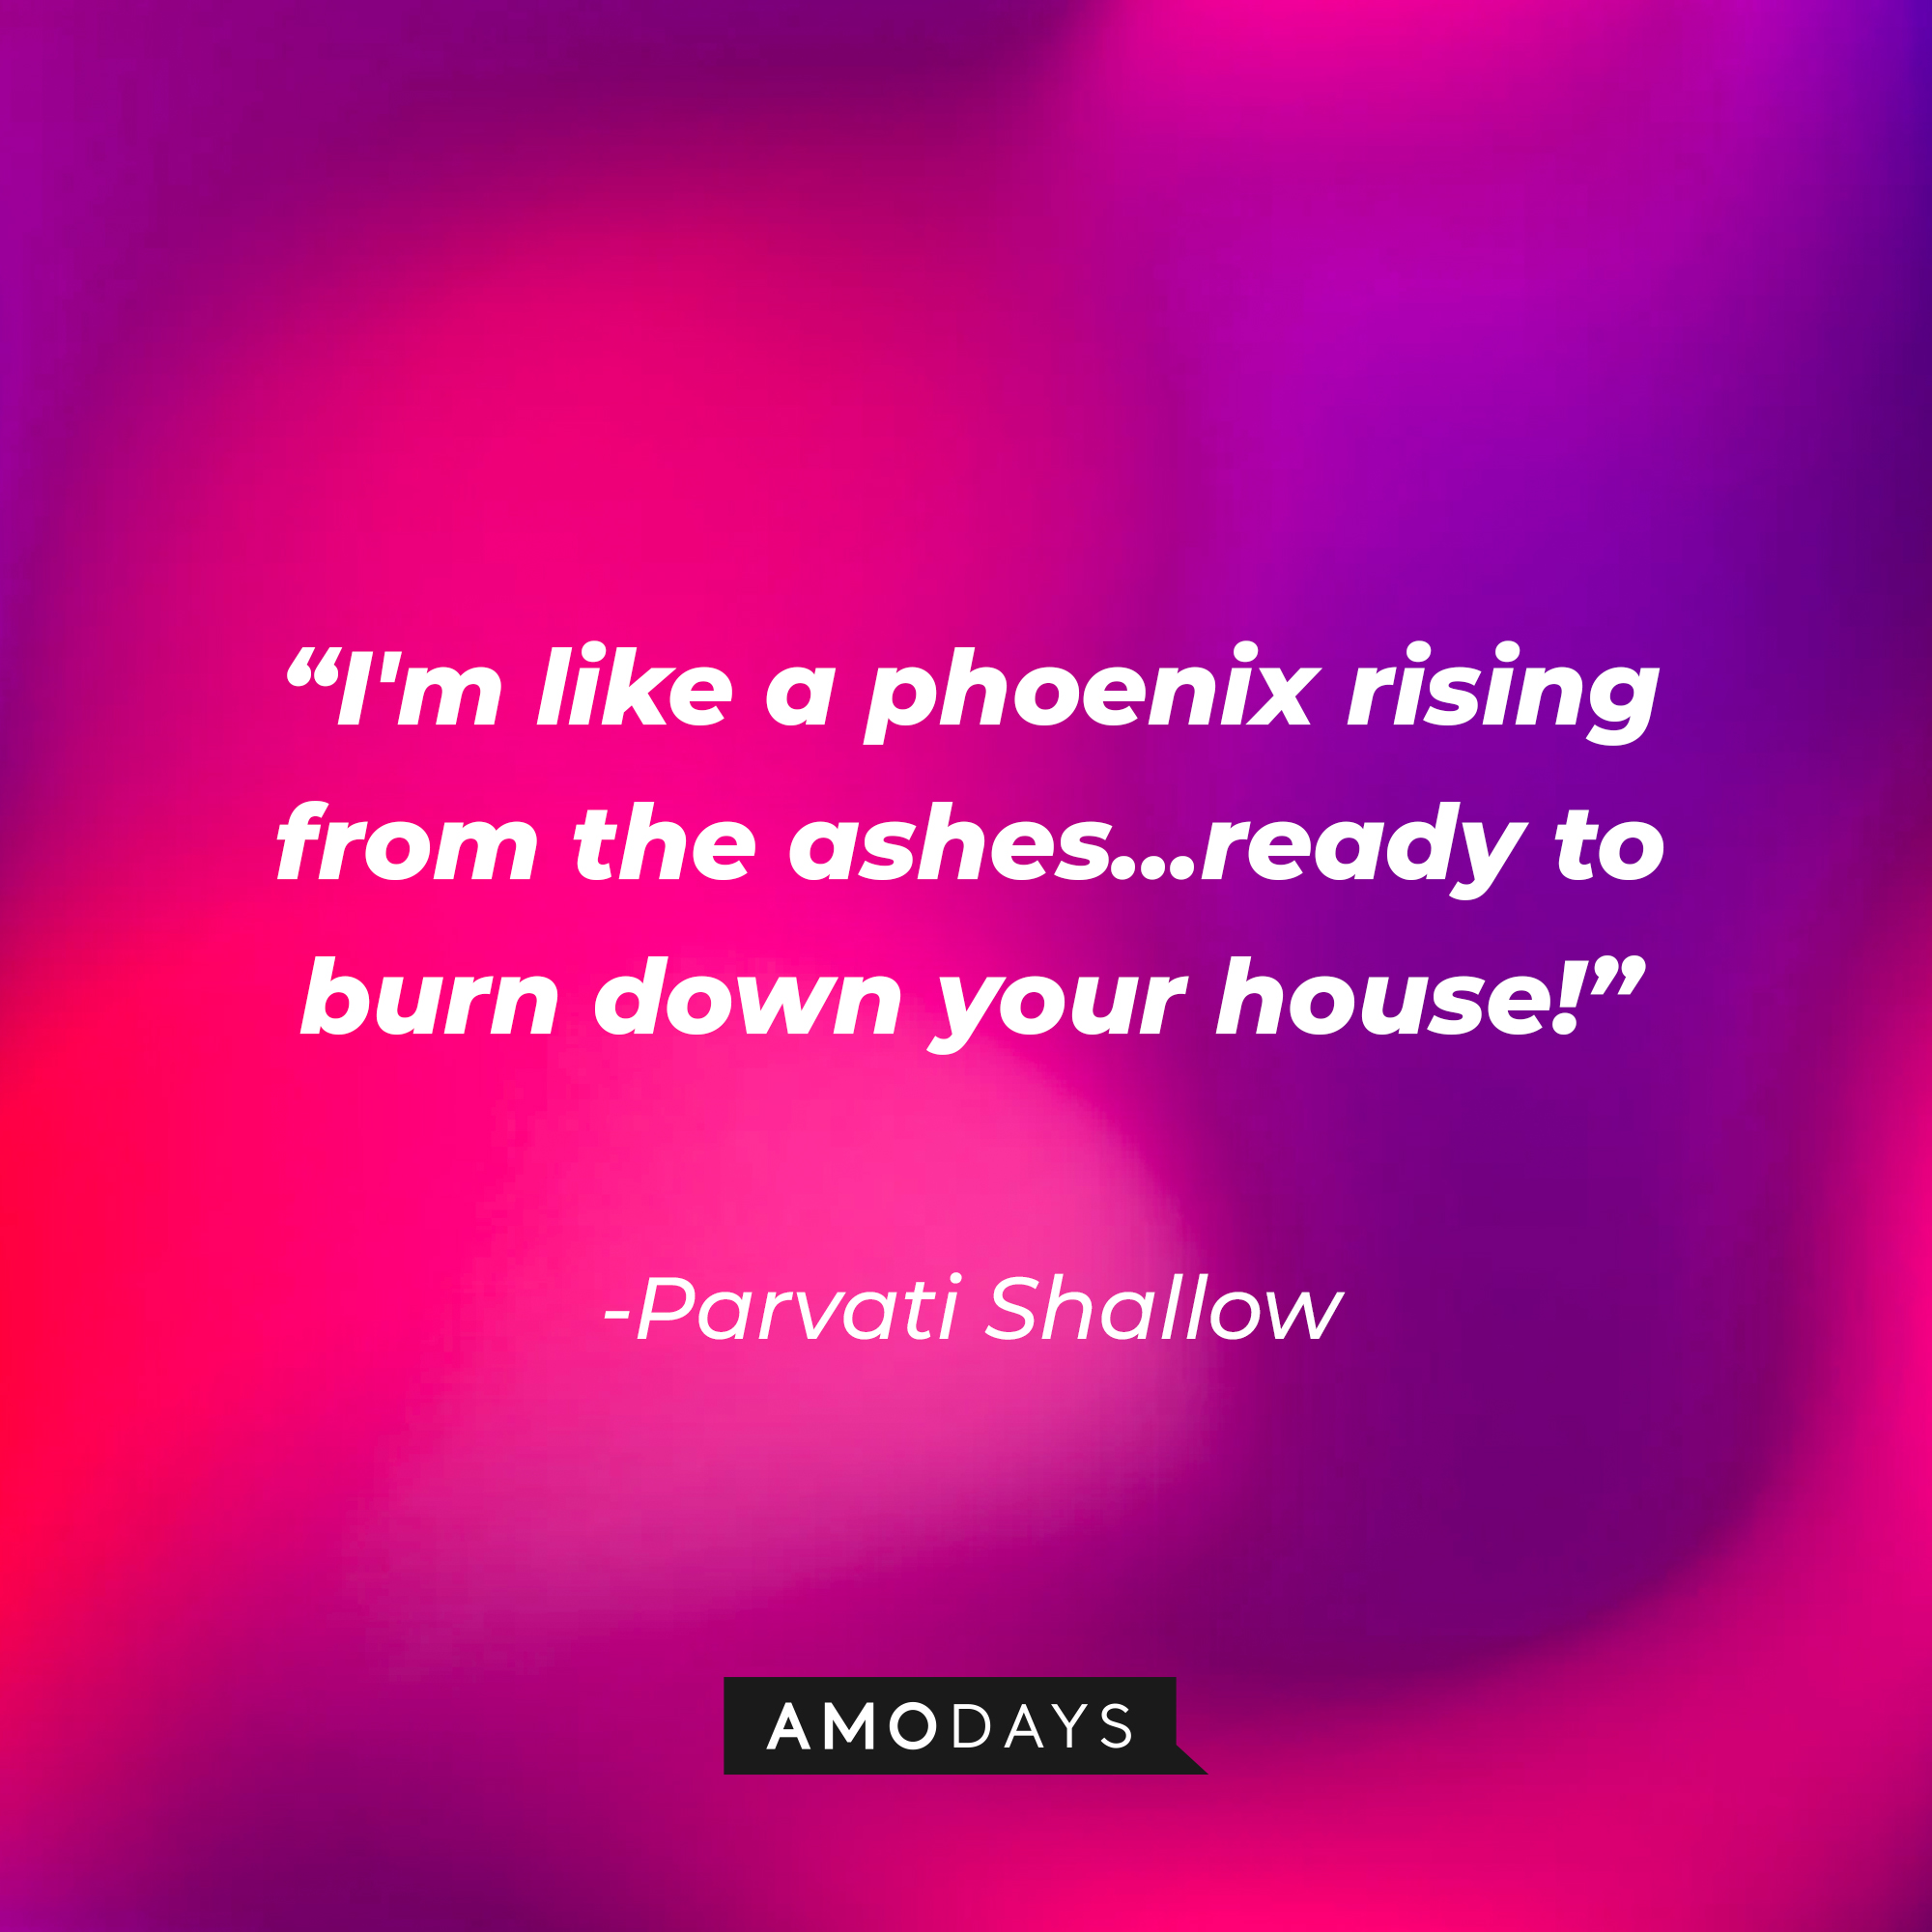 Parvati Shallowl’s quote: "I'm like a phoenix rising from the ashes...ready to burn down your house!" │ Source: AmoDays